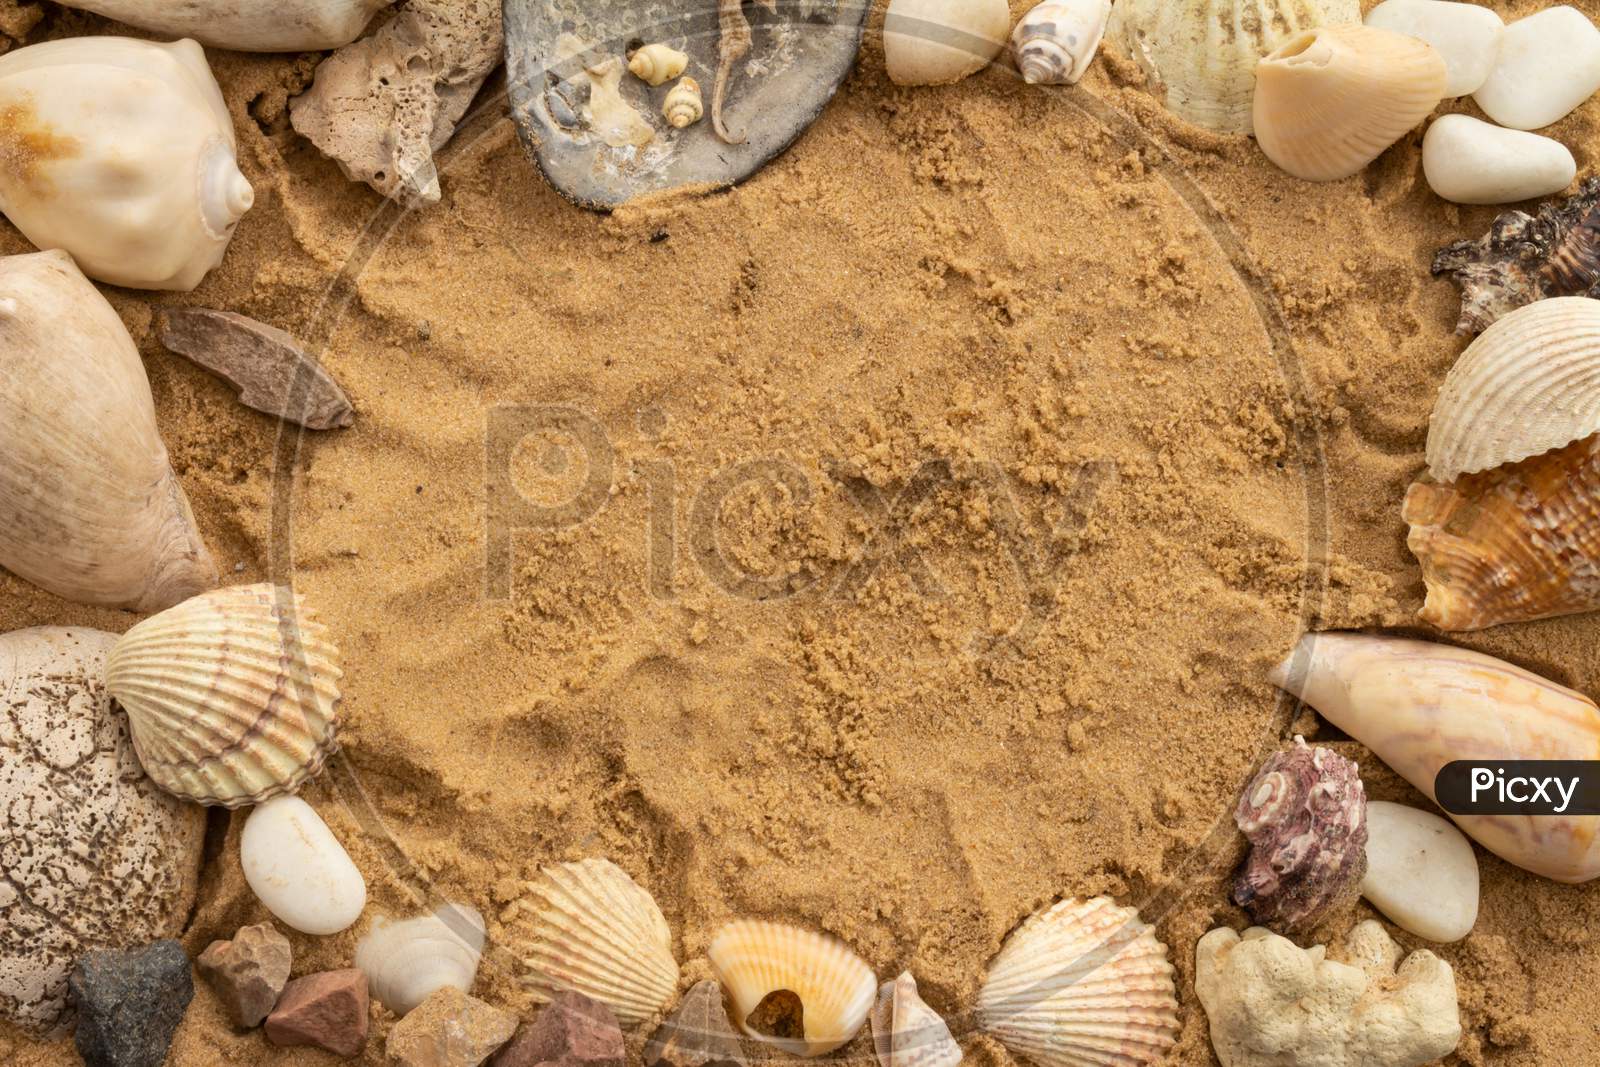 Seashells And Beach Stones On The Sand On A Sunny Day. Marine Items On A Beach While On Vacation.